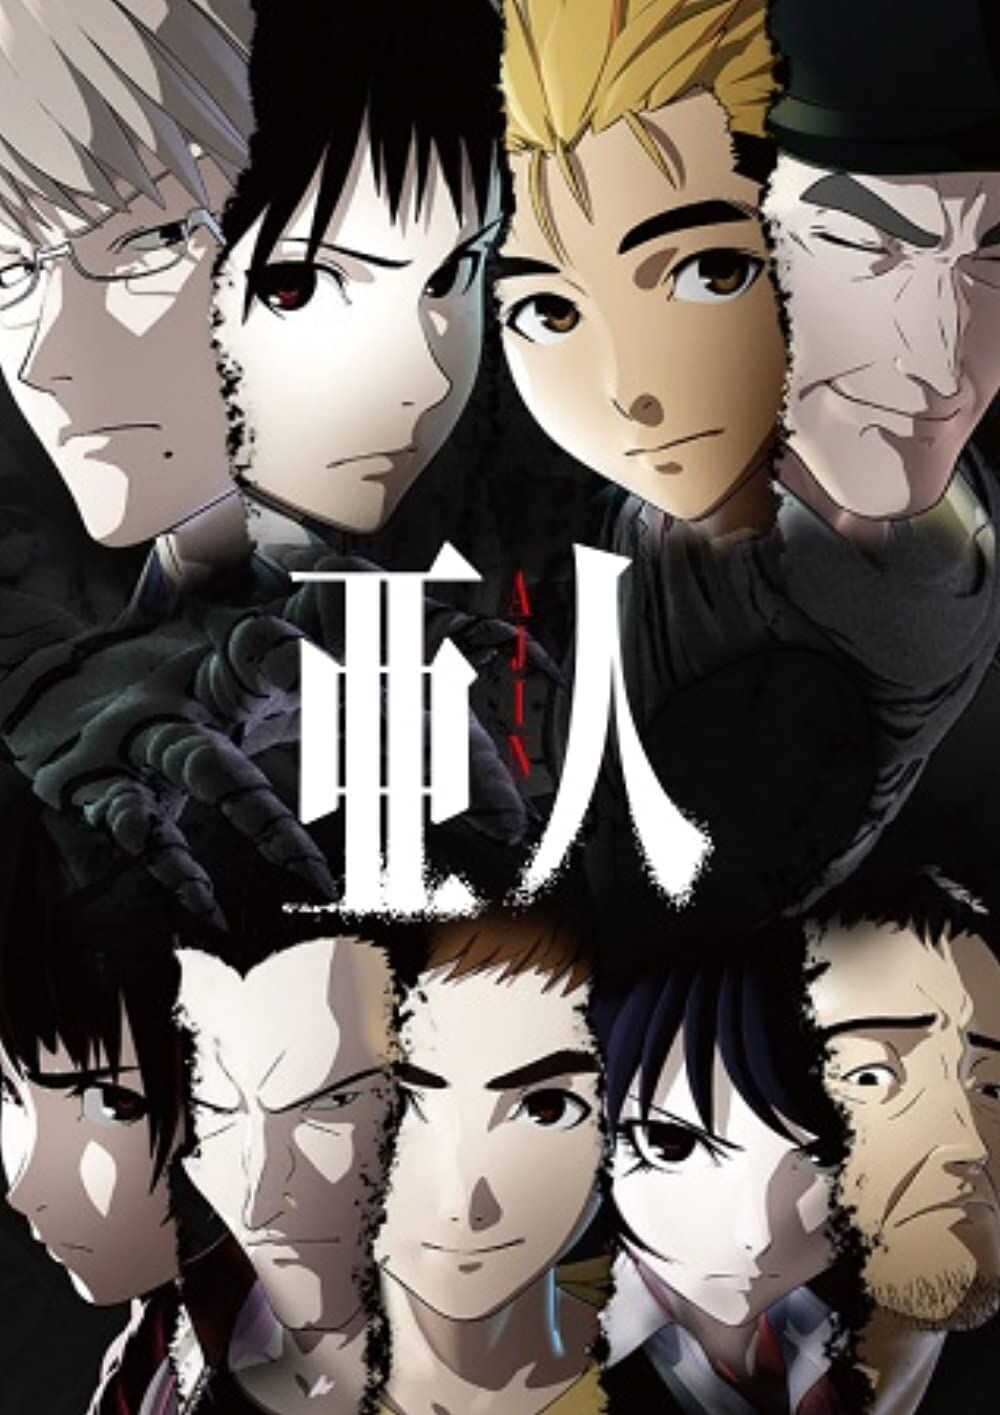 What are your thoughts on Ajin: Demi-Human? Is it any good? Is it worth  recommending? : r/manga